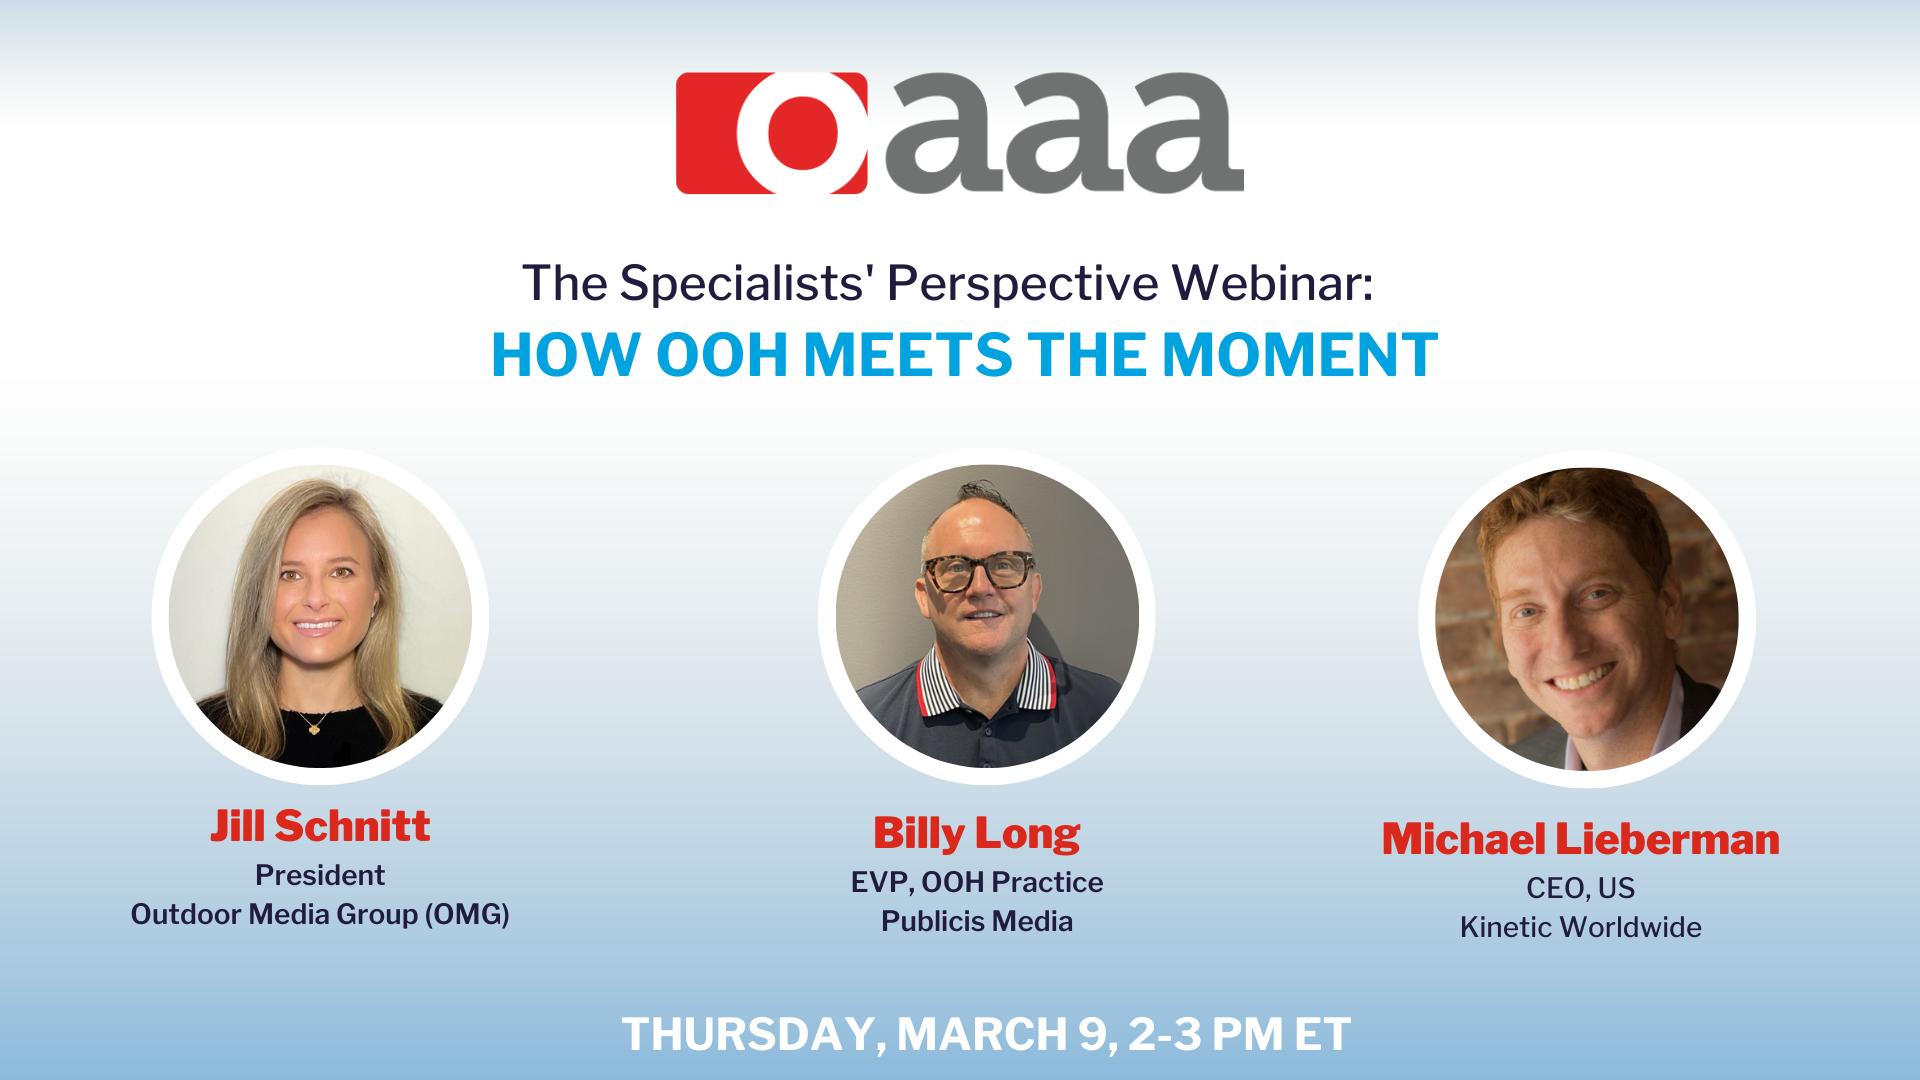 The Specialists’ Perspective: How OOH Meets the Moment